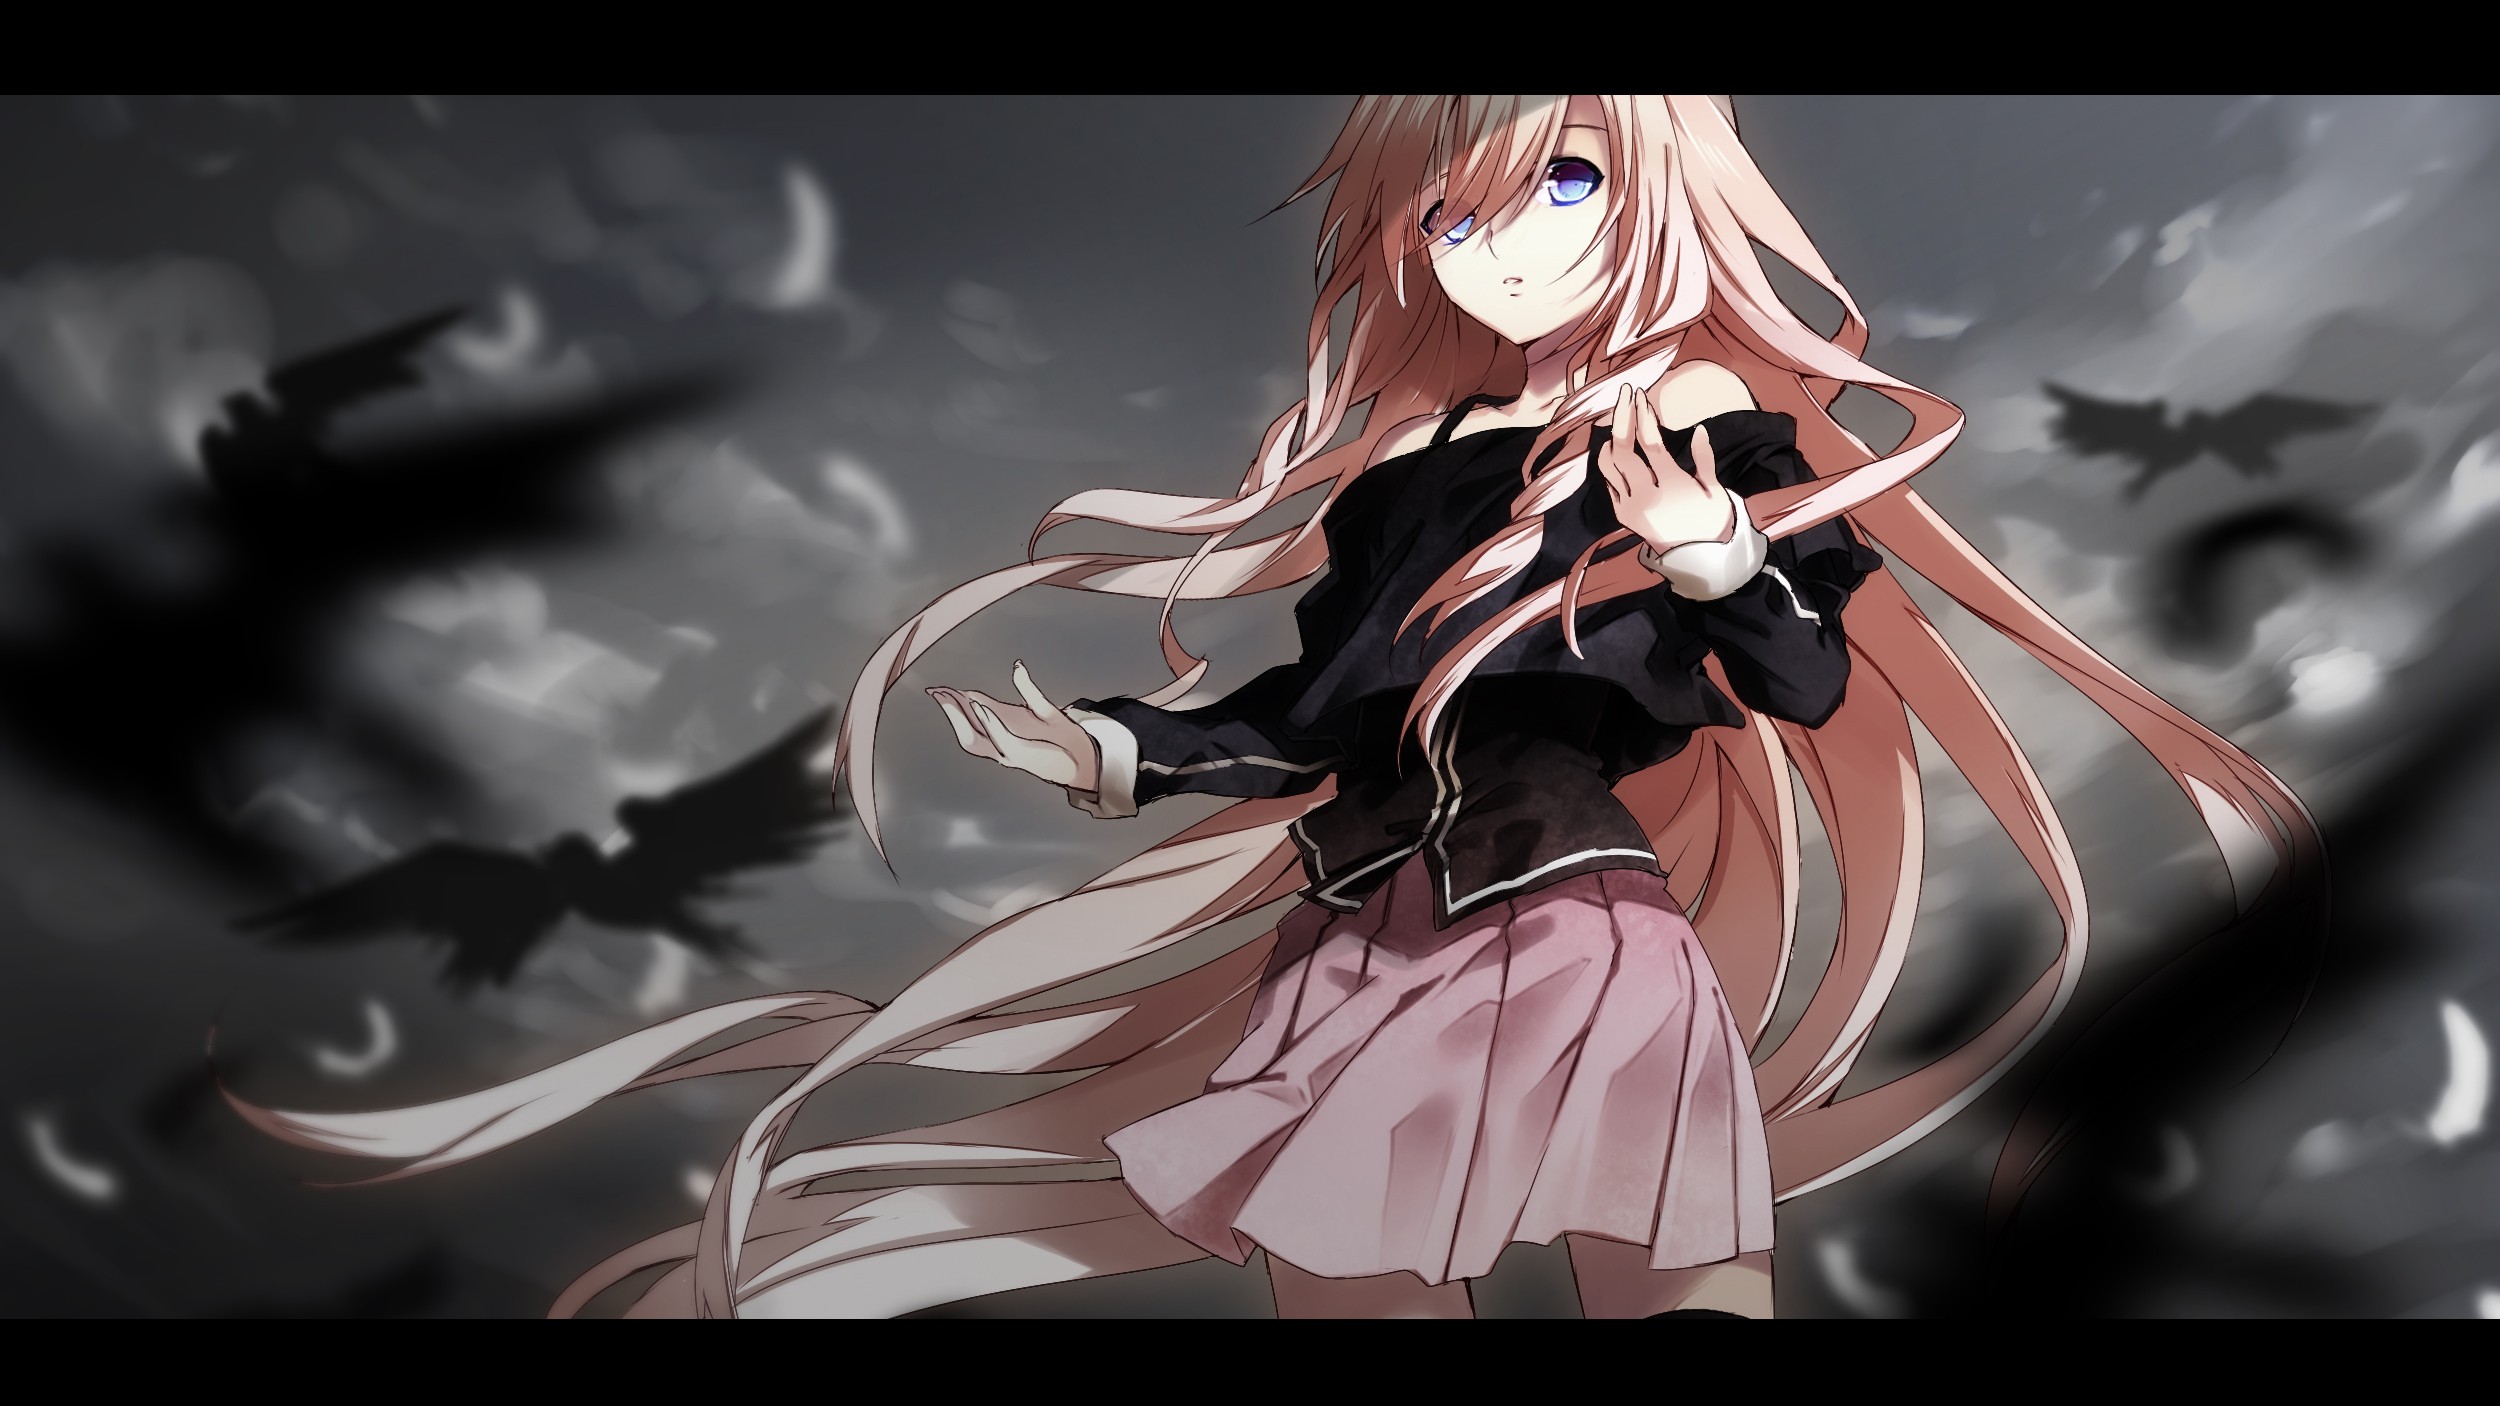 Ia Vocaloid Hd Wallpaper Background Image 2500x1406